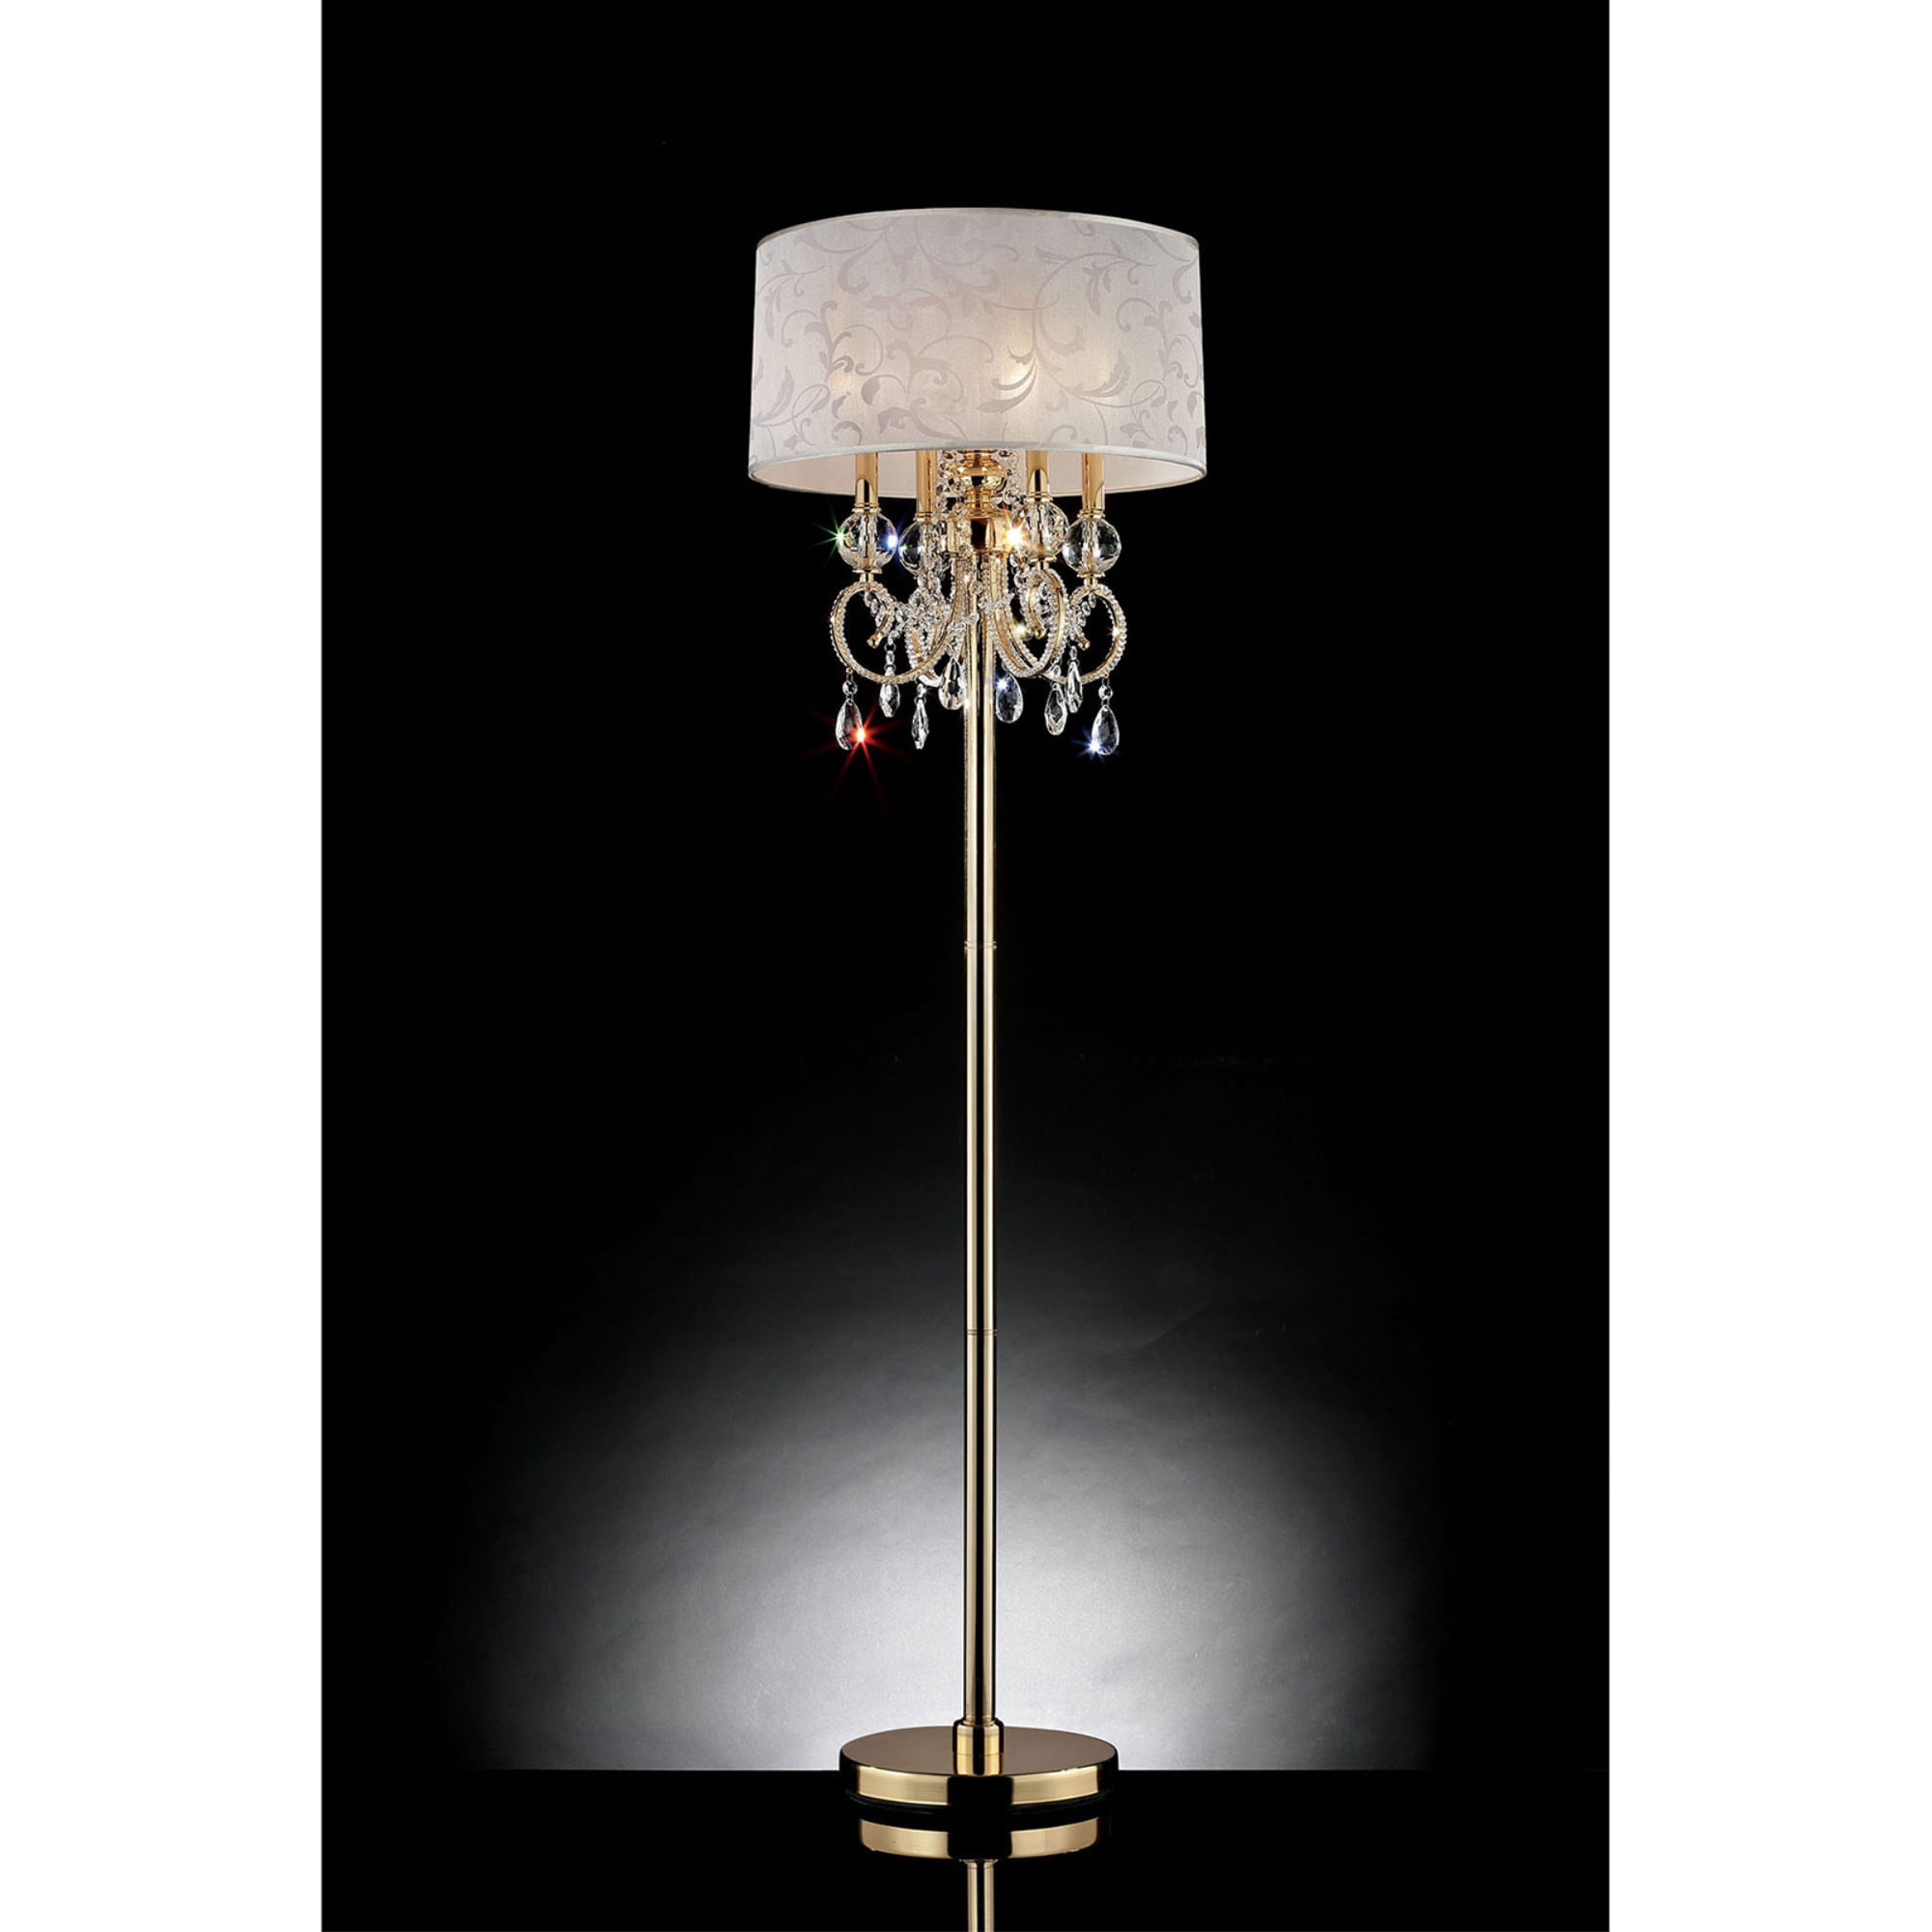 Chandelier Floor Lamp with Hanging Crystals and Floral Pattern Shade